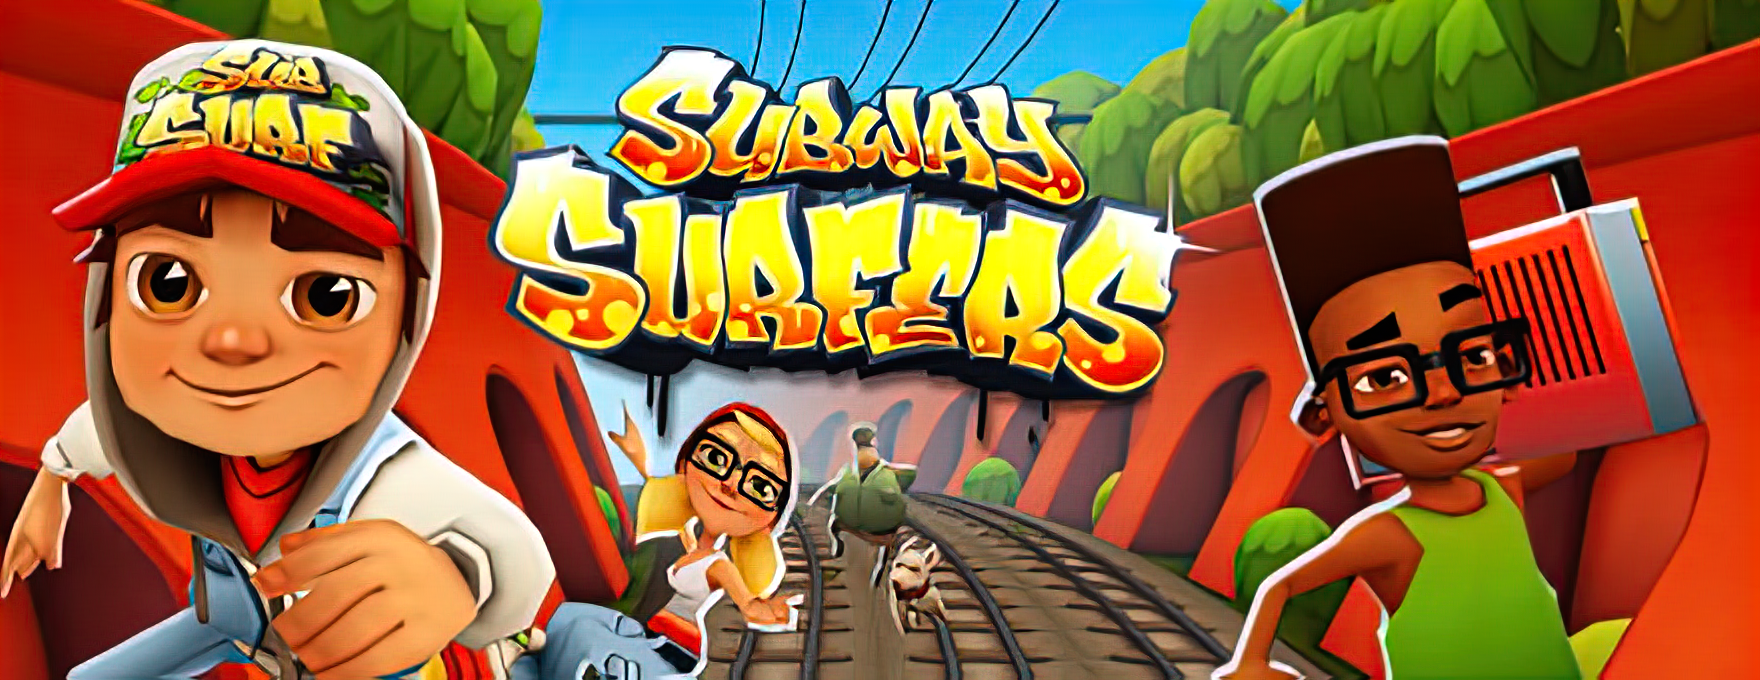 Subway Surfers for PC by Lennard Haussler